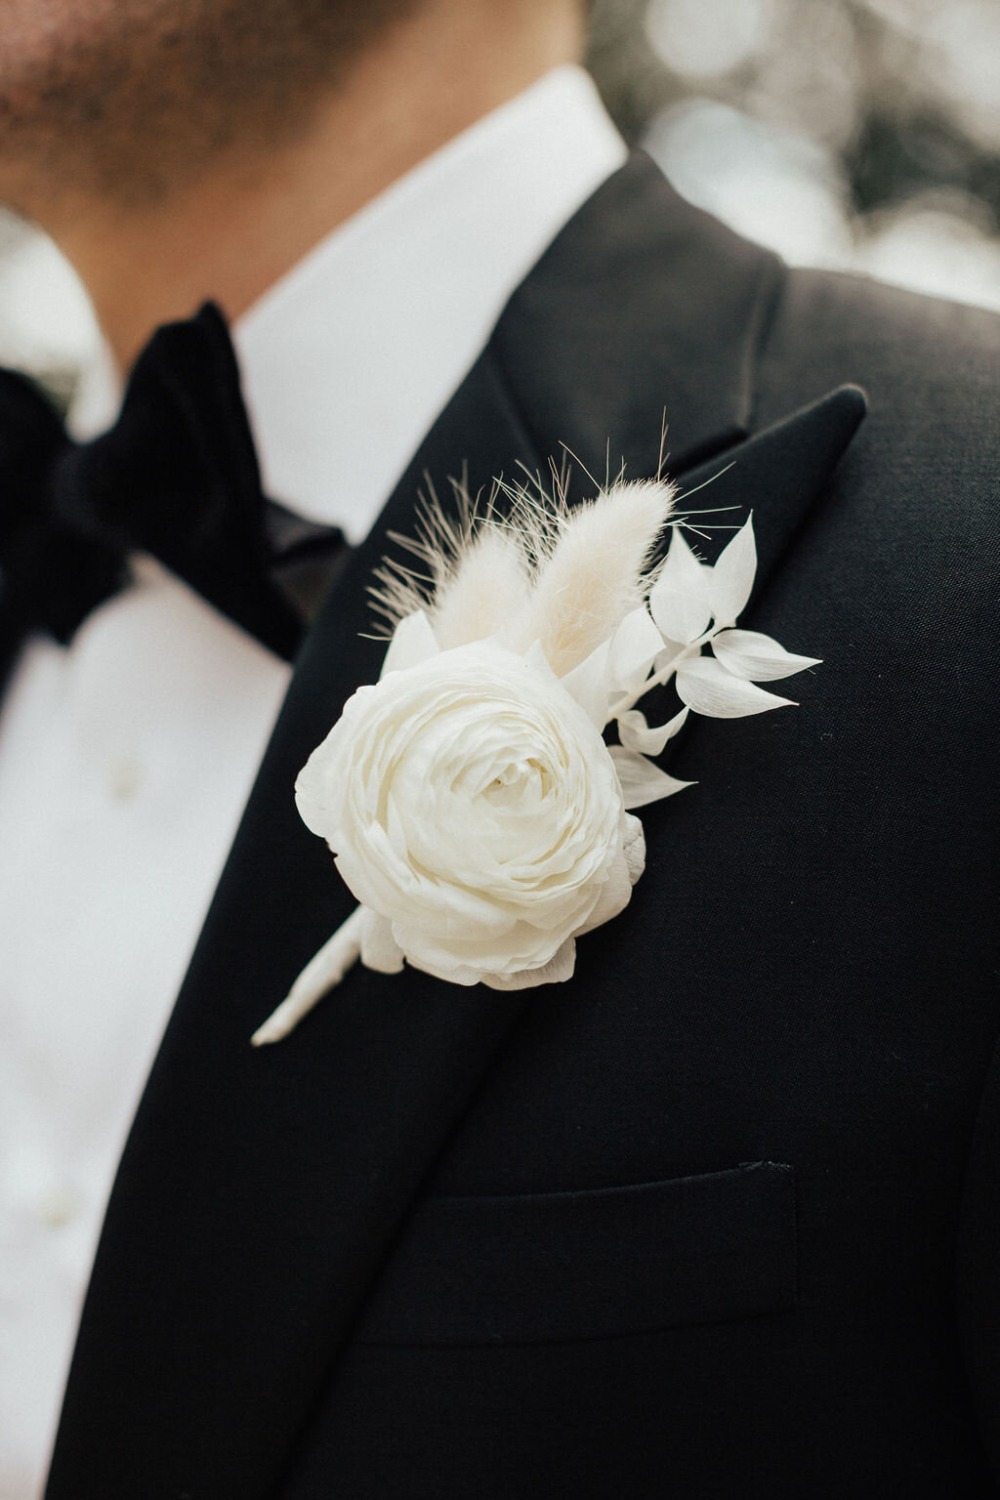 groom in black tux with white boutonniÃ¨re